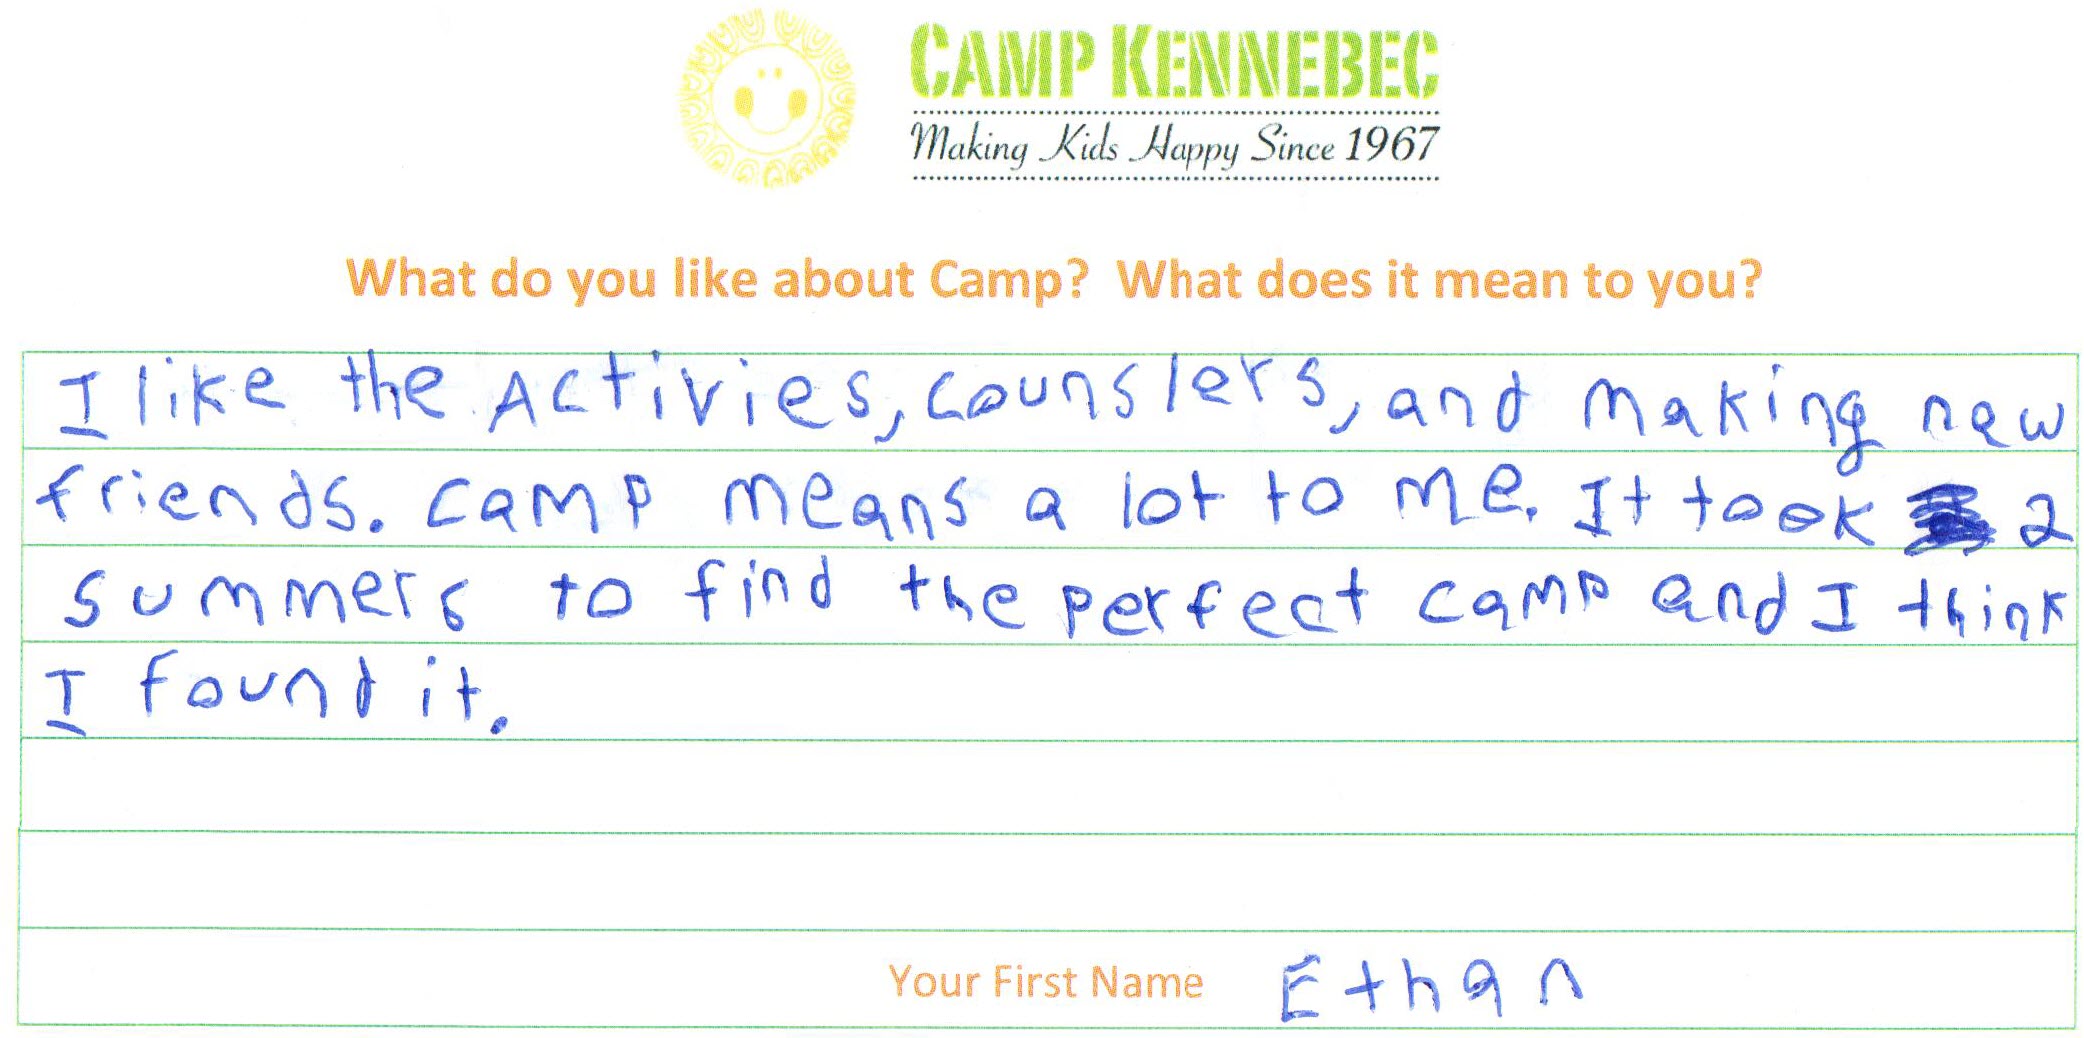 Camp Kennebec Campers tell us what they think of camp. This is an example:  I like the activities, counsellors, and making new friends. Camp means a lot to me. It took 2 summers to find the perfect camp and I think I found it. - Ethan